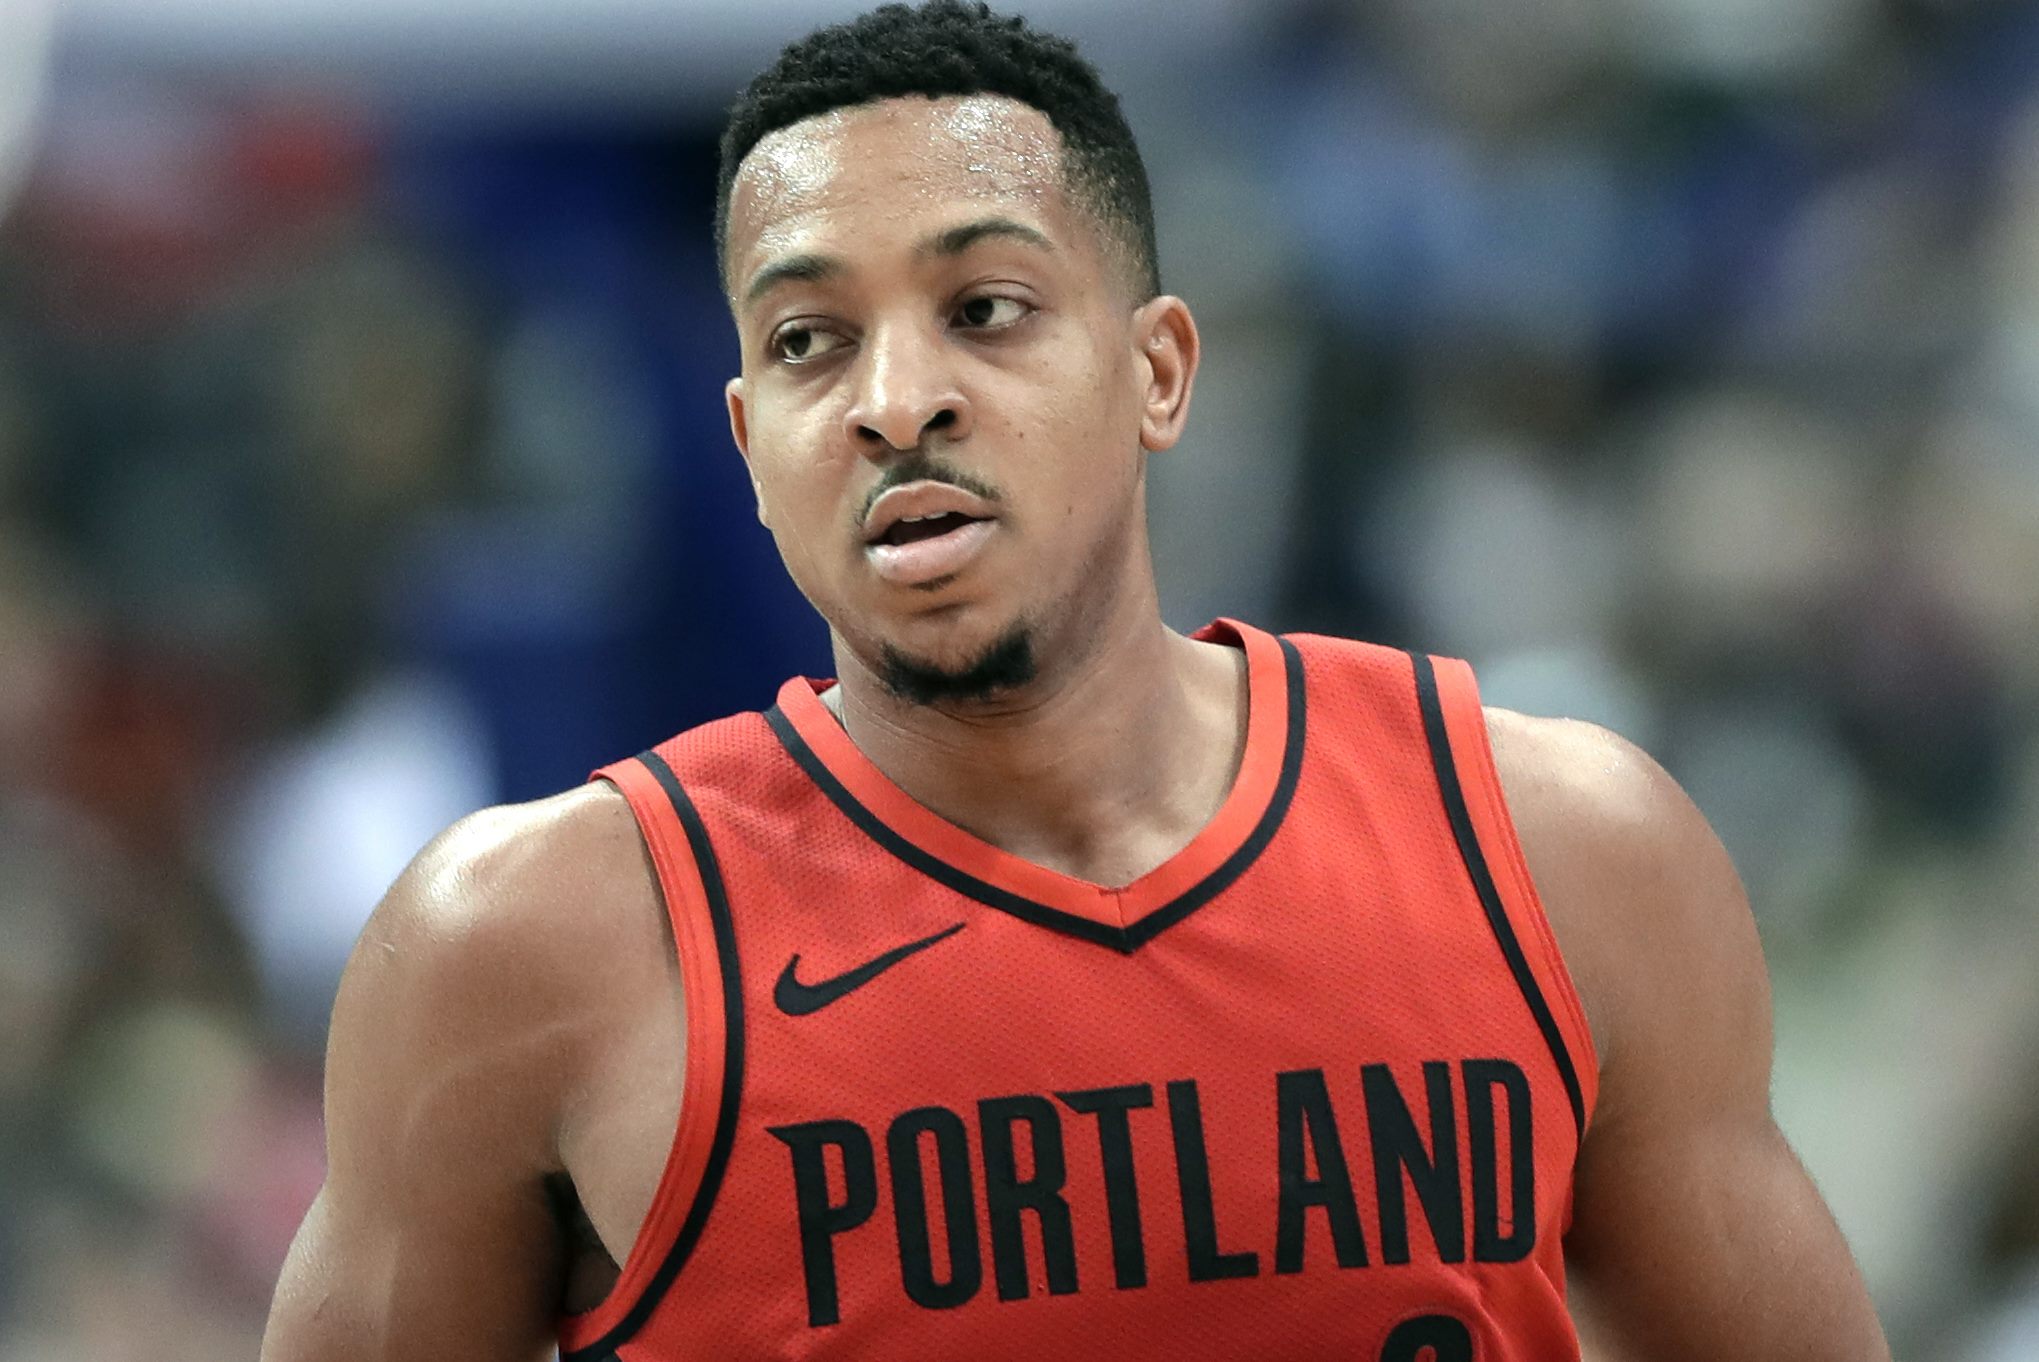 C.J. McCollum to try out for World University Games team